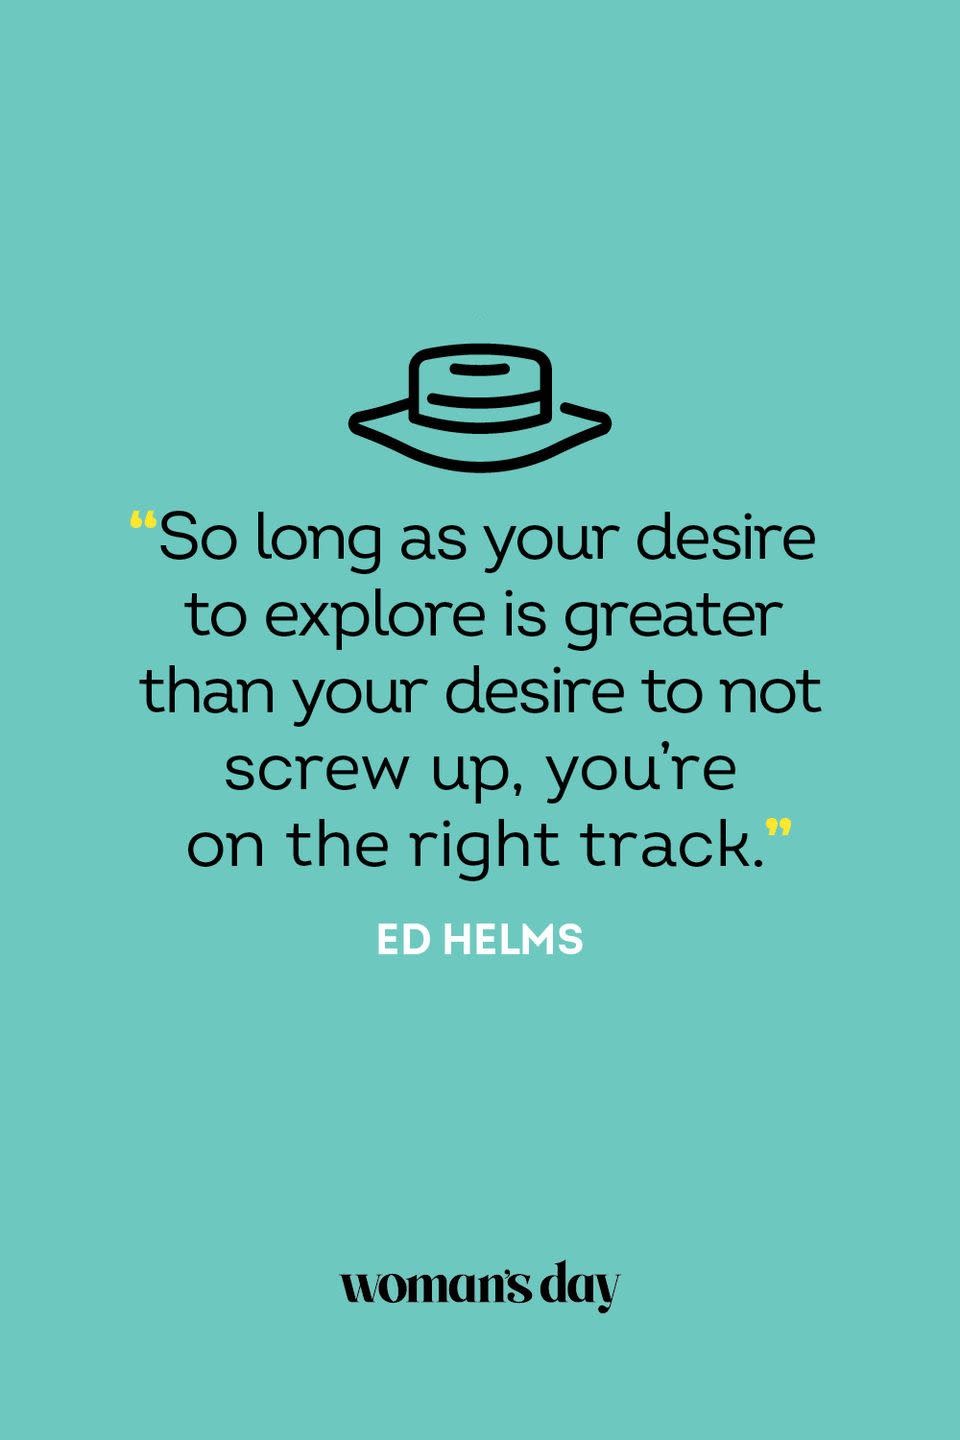 <p>“So long as your desire to explore is greater than your desire to not screw up, you’re on the right track.”</p>